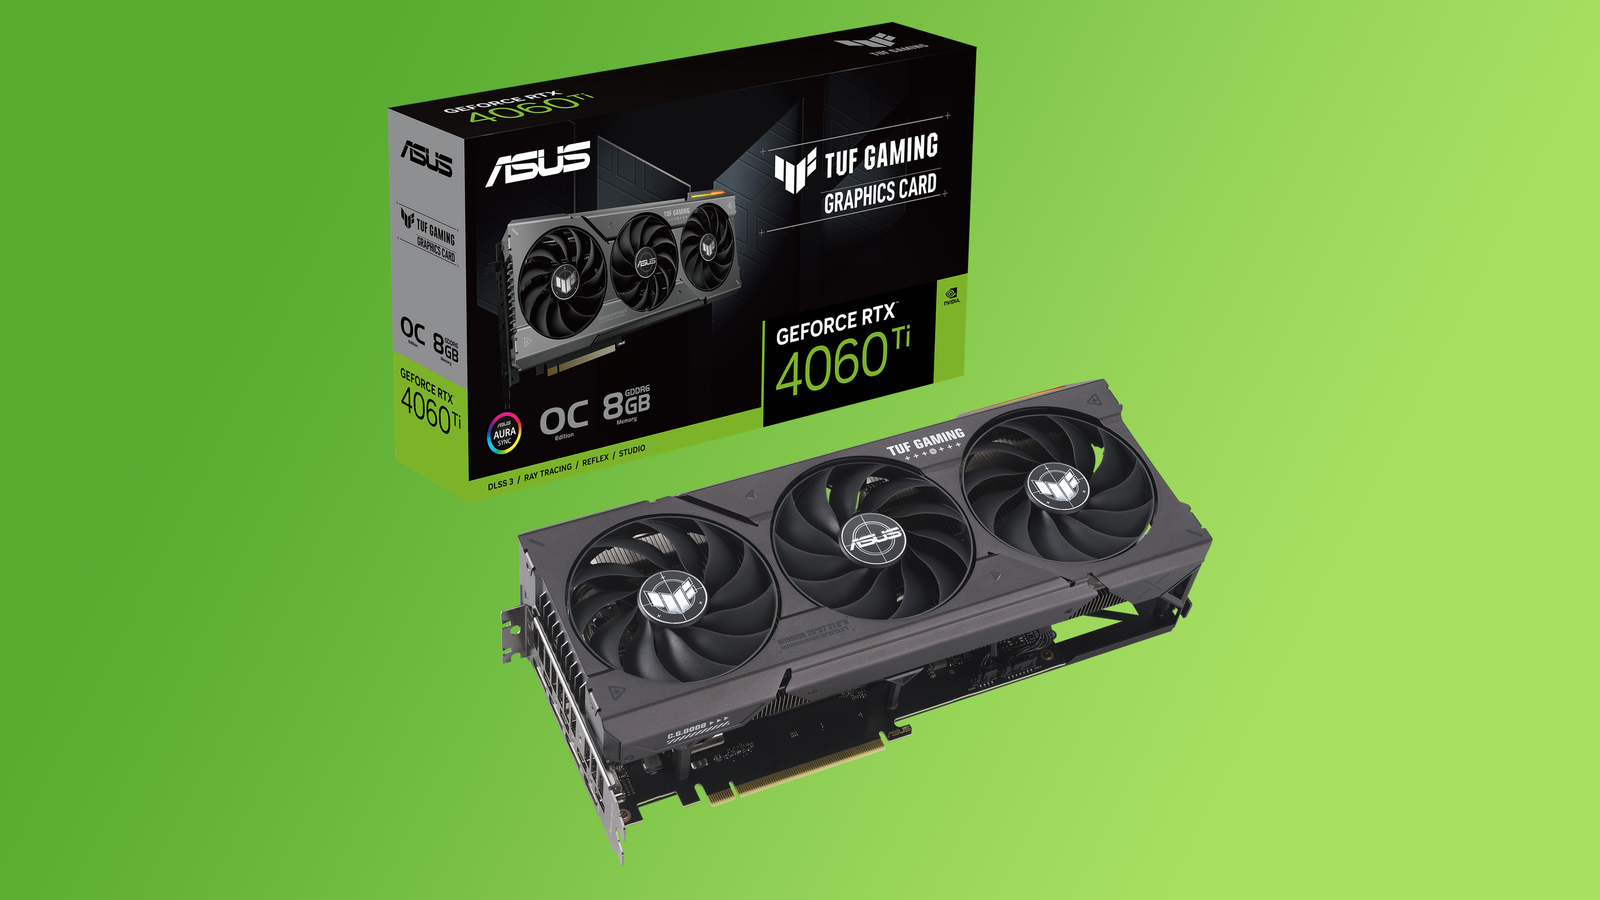 NVIDIA GeForce RTX 4060 Ti Available as 8 GB and 16 GB, This Month. RTX 4060  in July